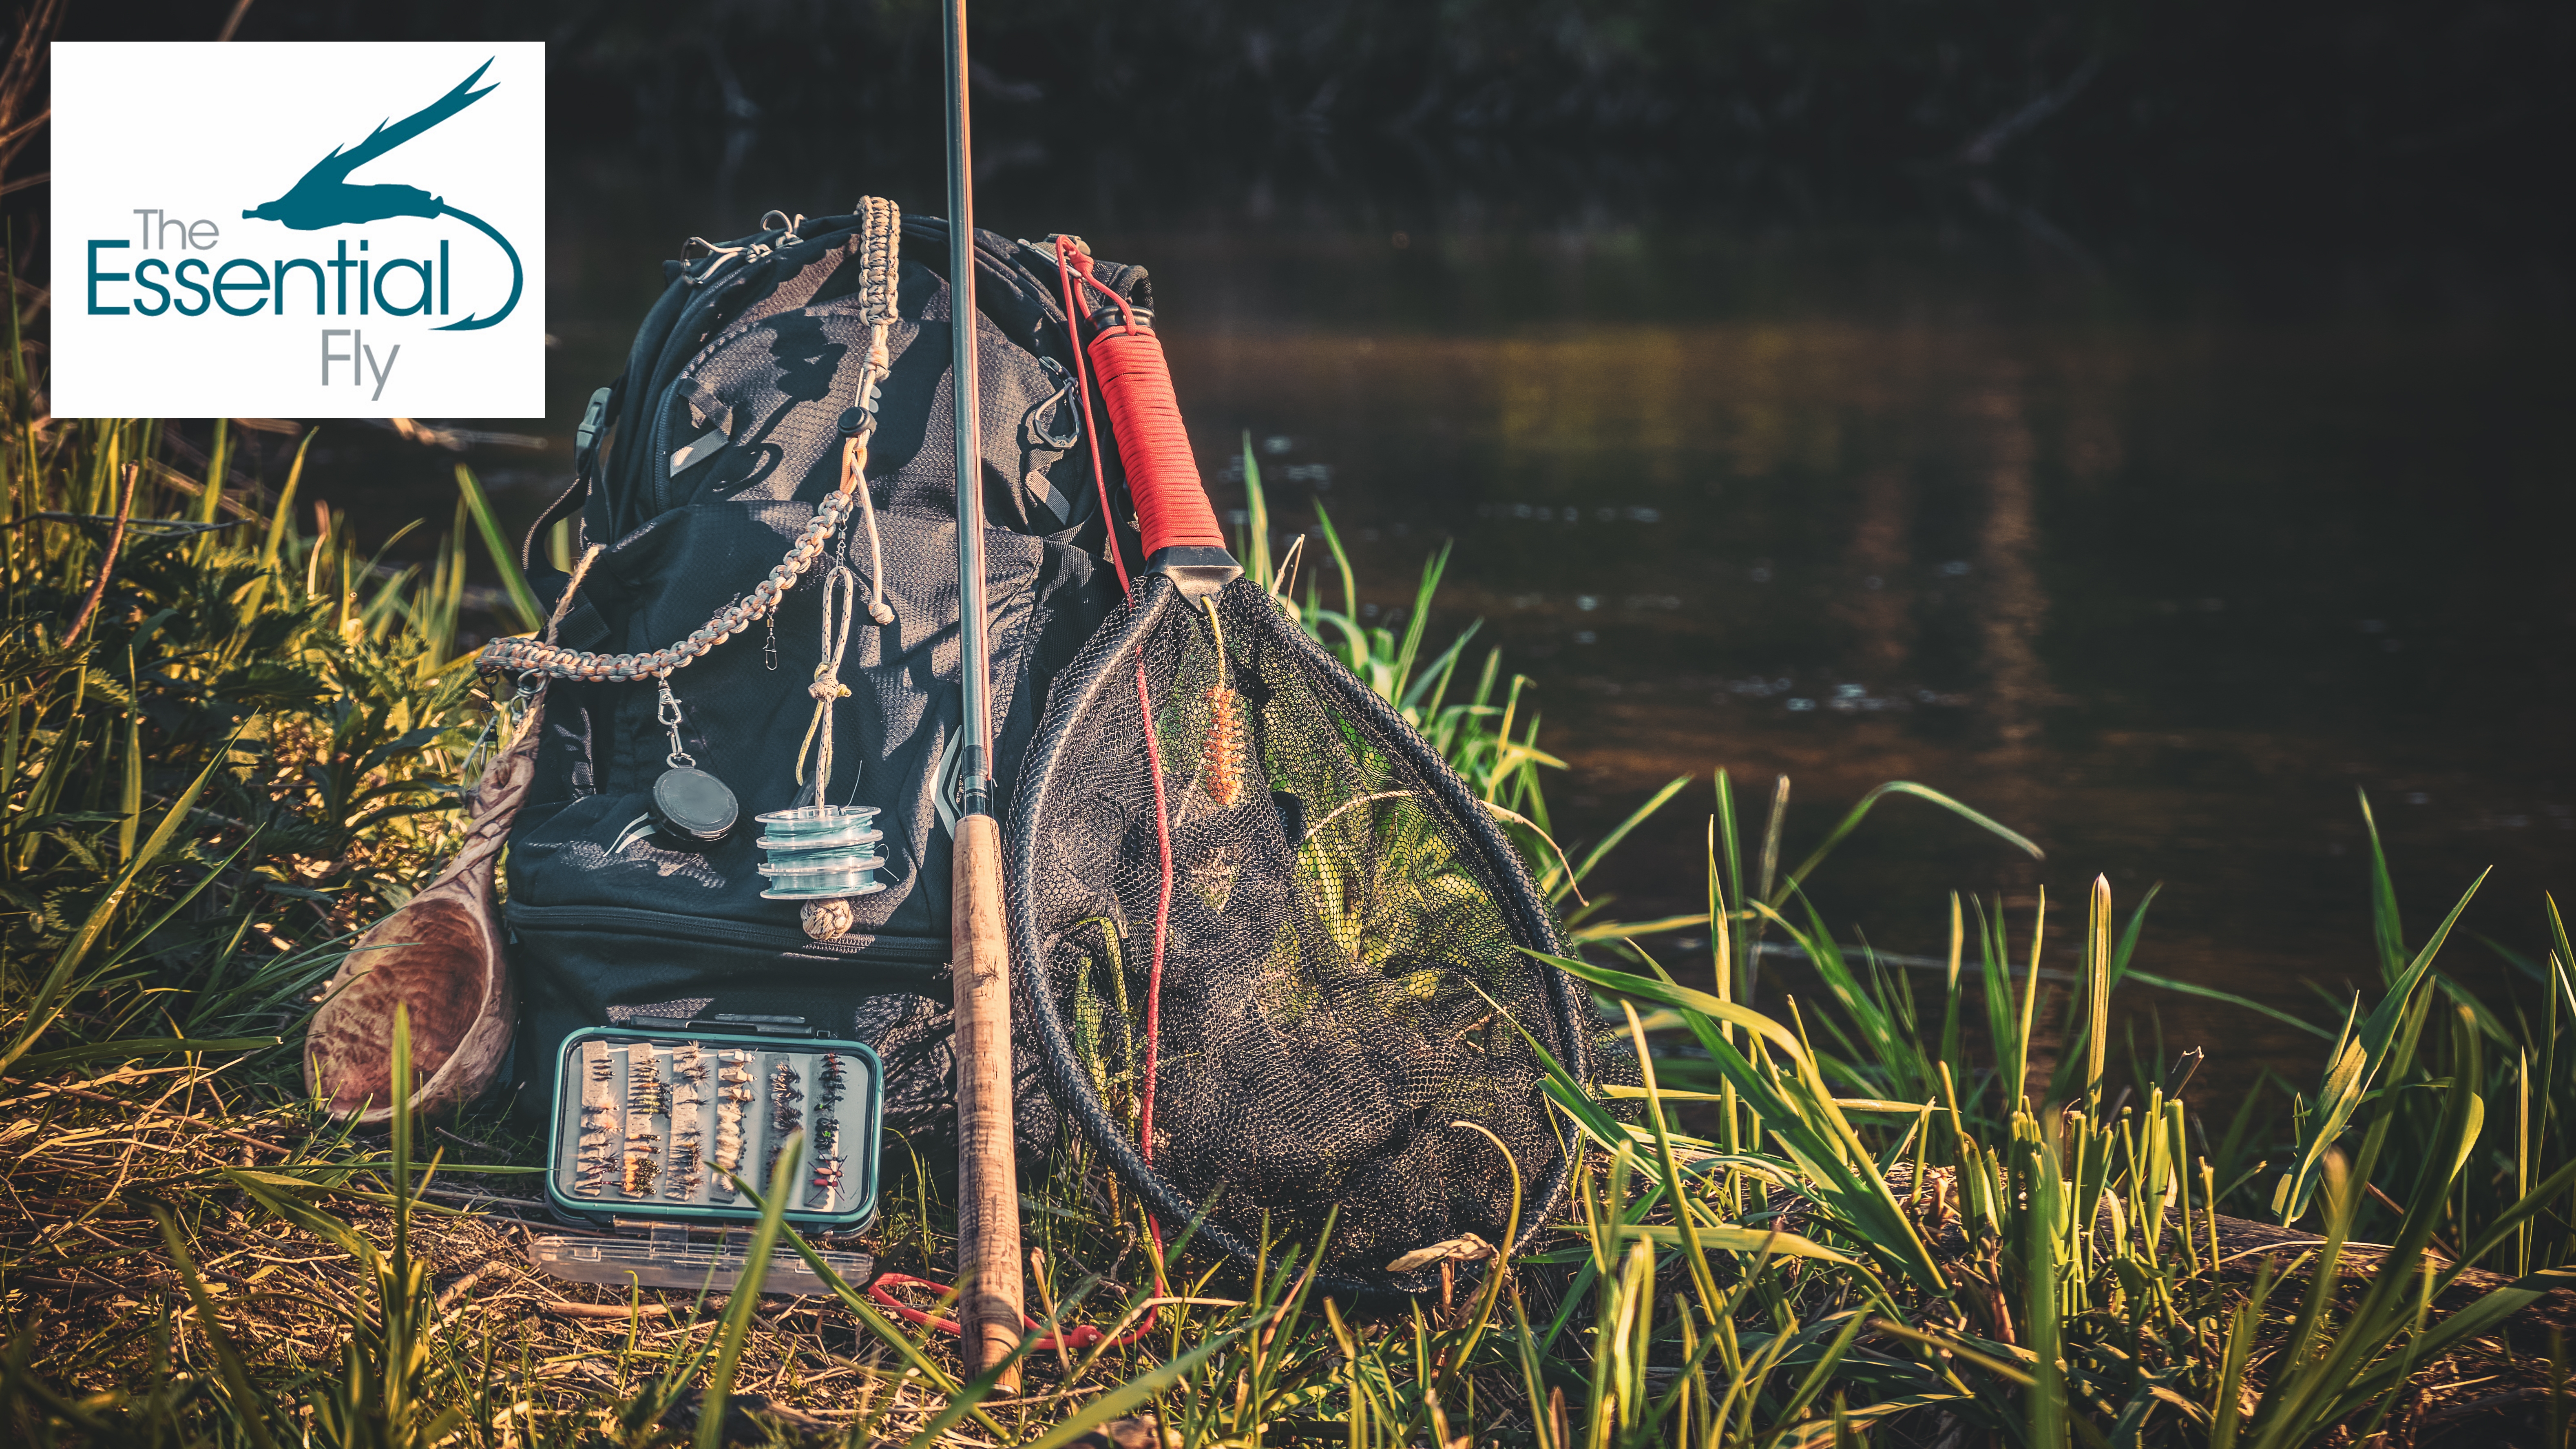 The Ultimate Check List For Fly Fishing!